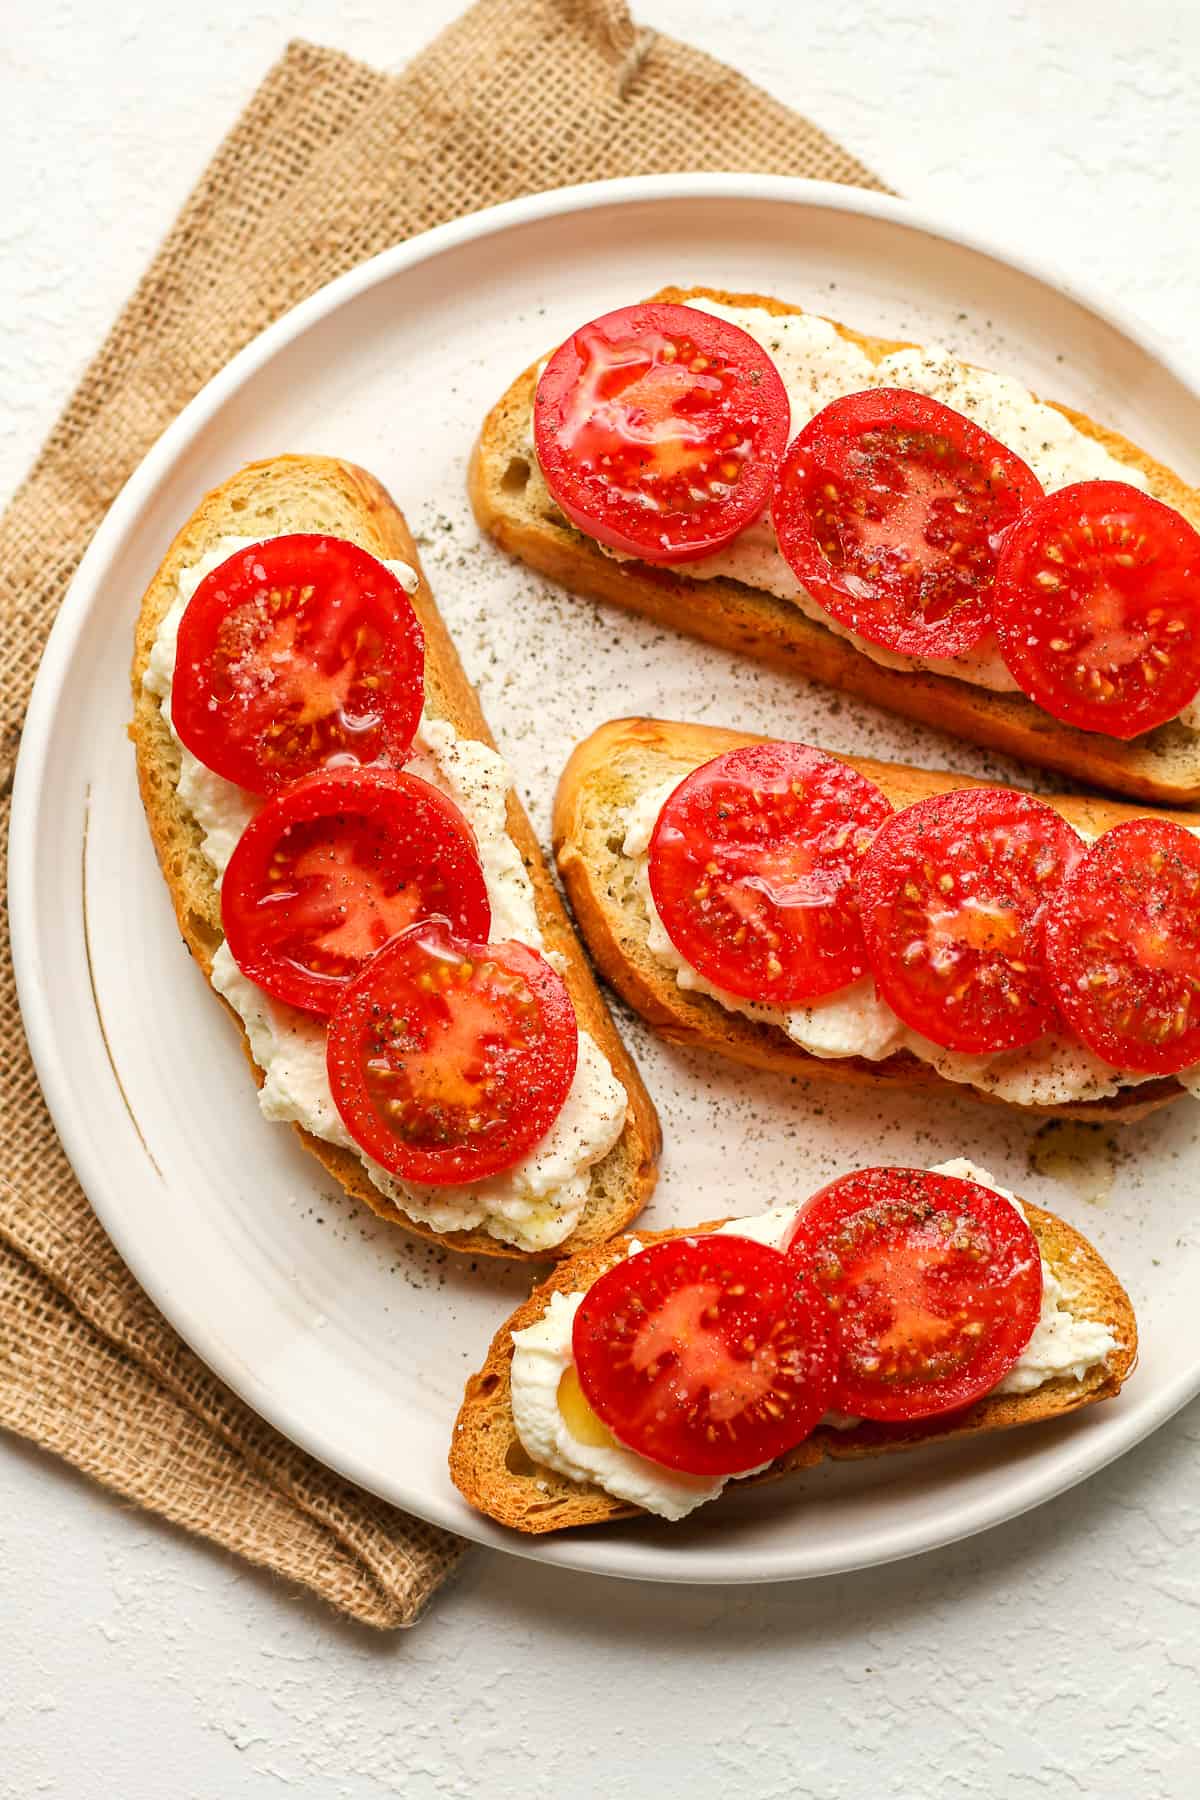 A plate of crostini using sliced Italian bread - topped with ricotta cheese and tomatoes.